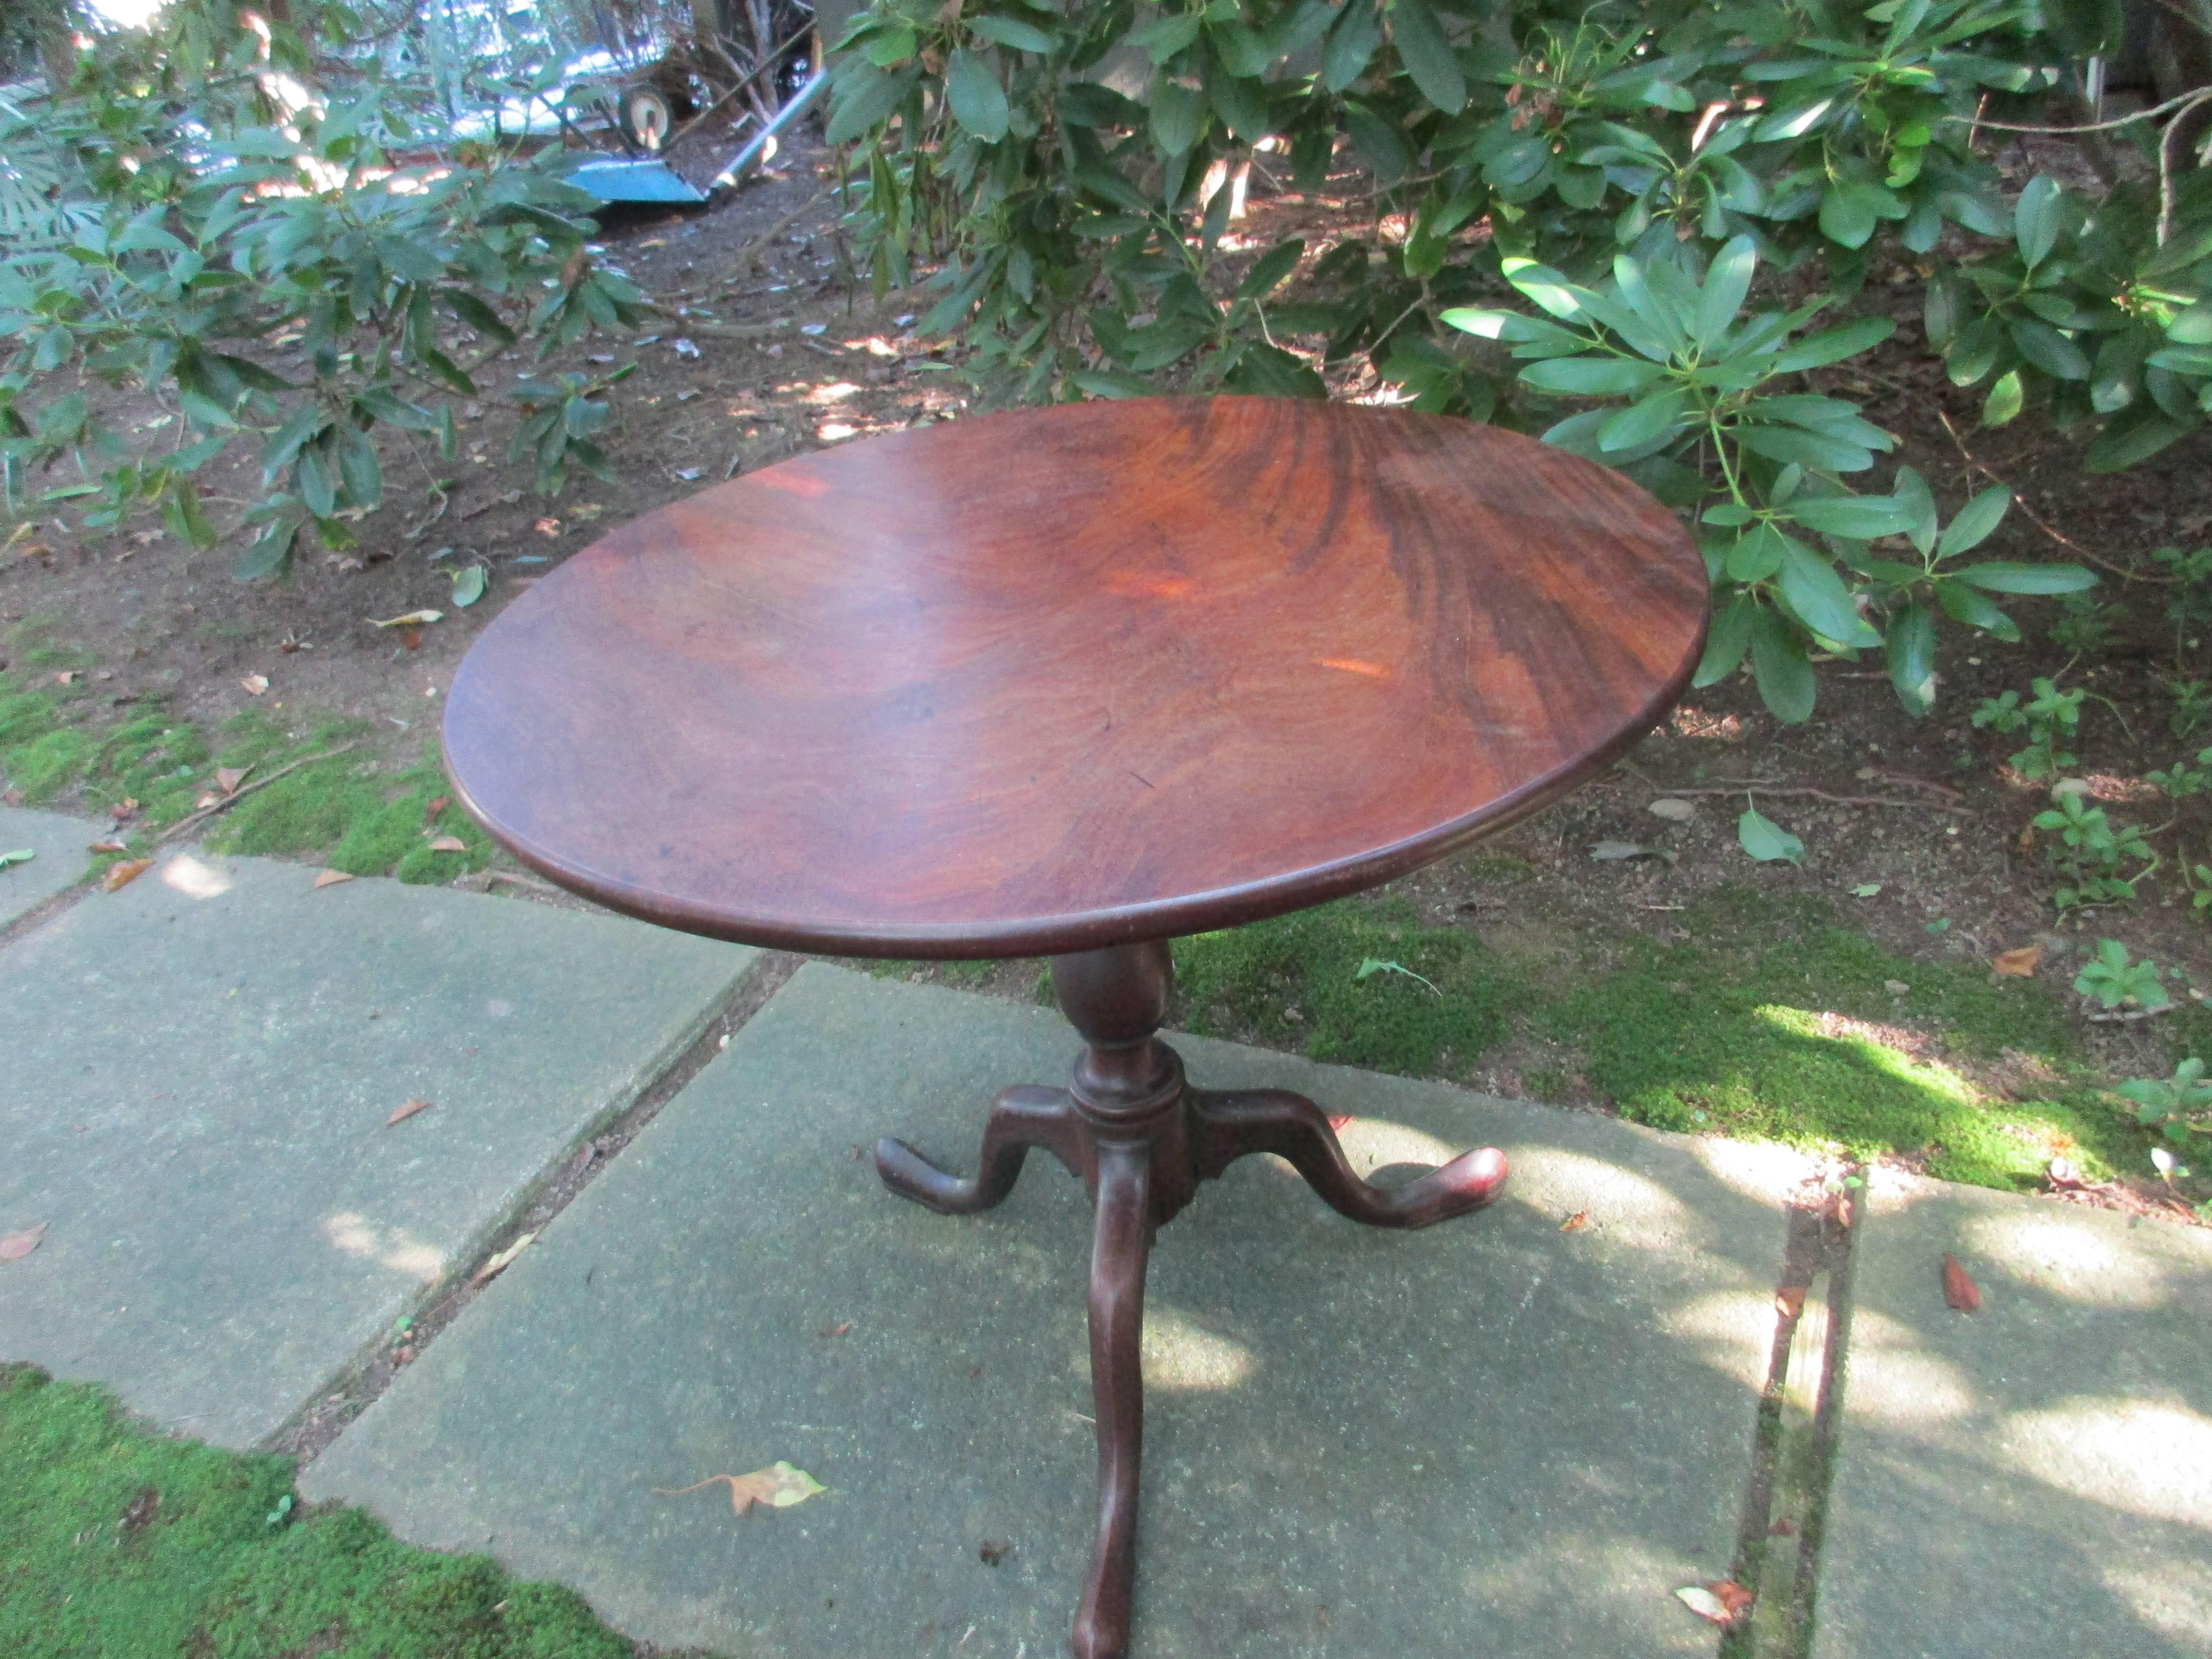 Georgian 18thc Tilt Top Breakfast/Game Table Top Made of one Solid Piece of Mahogany.-very good vintage patina